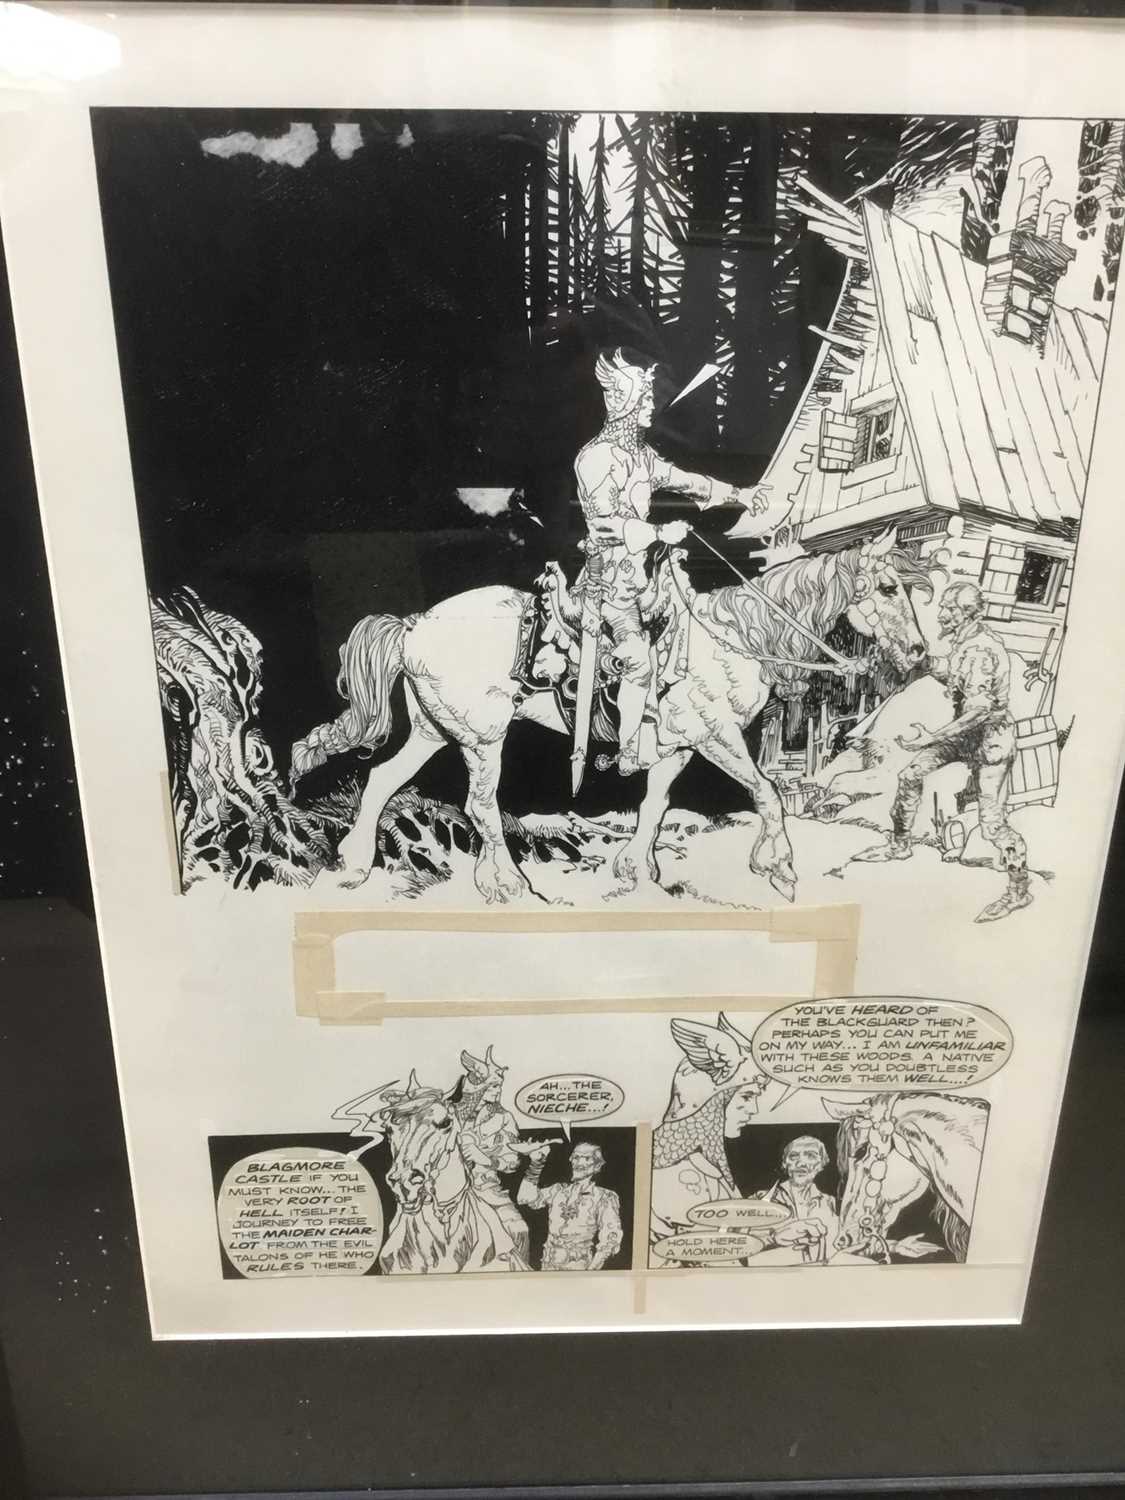 Lot 2 - Comic Book interest: Attributed to Estaban Moroto (b. 1942) series of eight original illustrations for a comic book publication